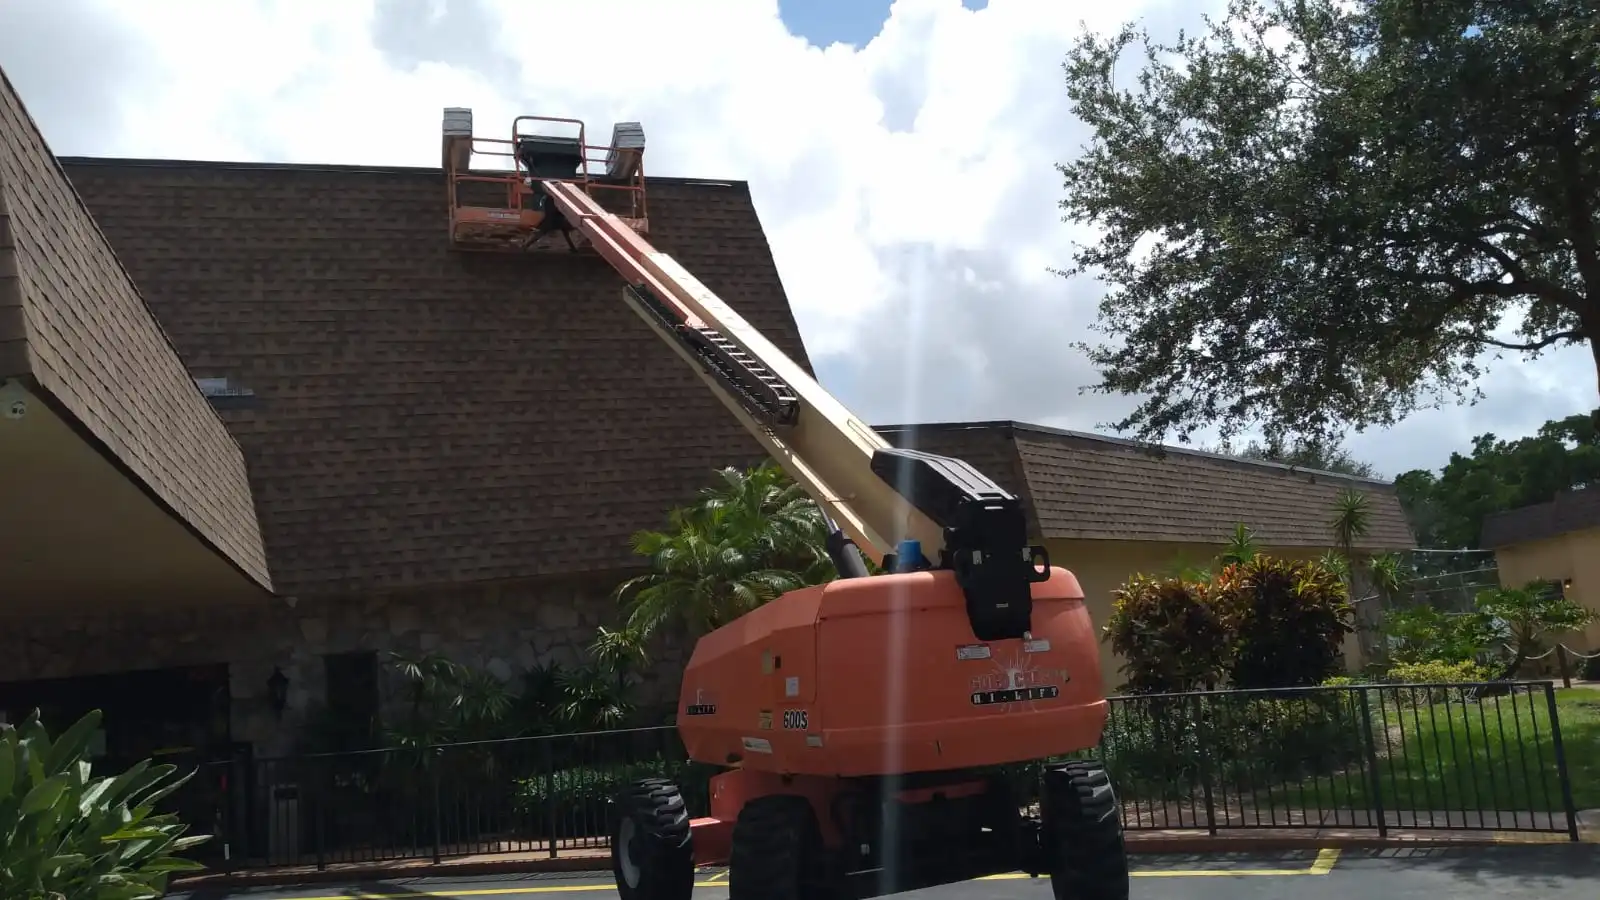 A telescopic lift conveying roofing materials to the roof of a building, with a focus on industrial roofing maintenance or installation.